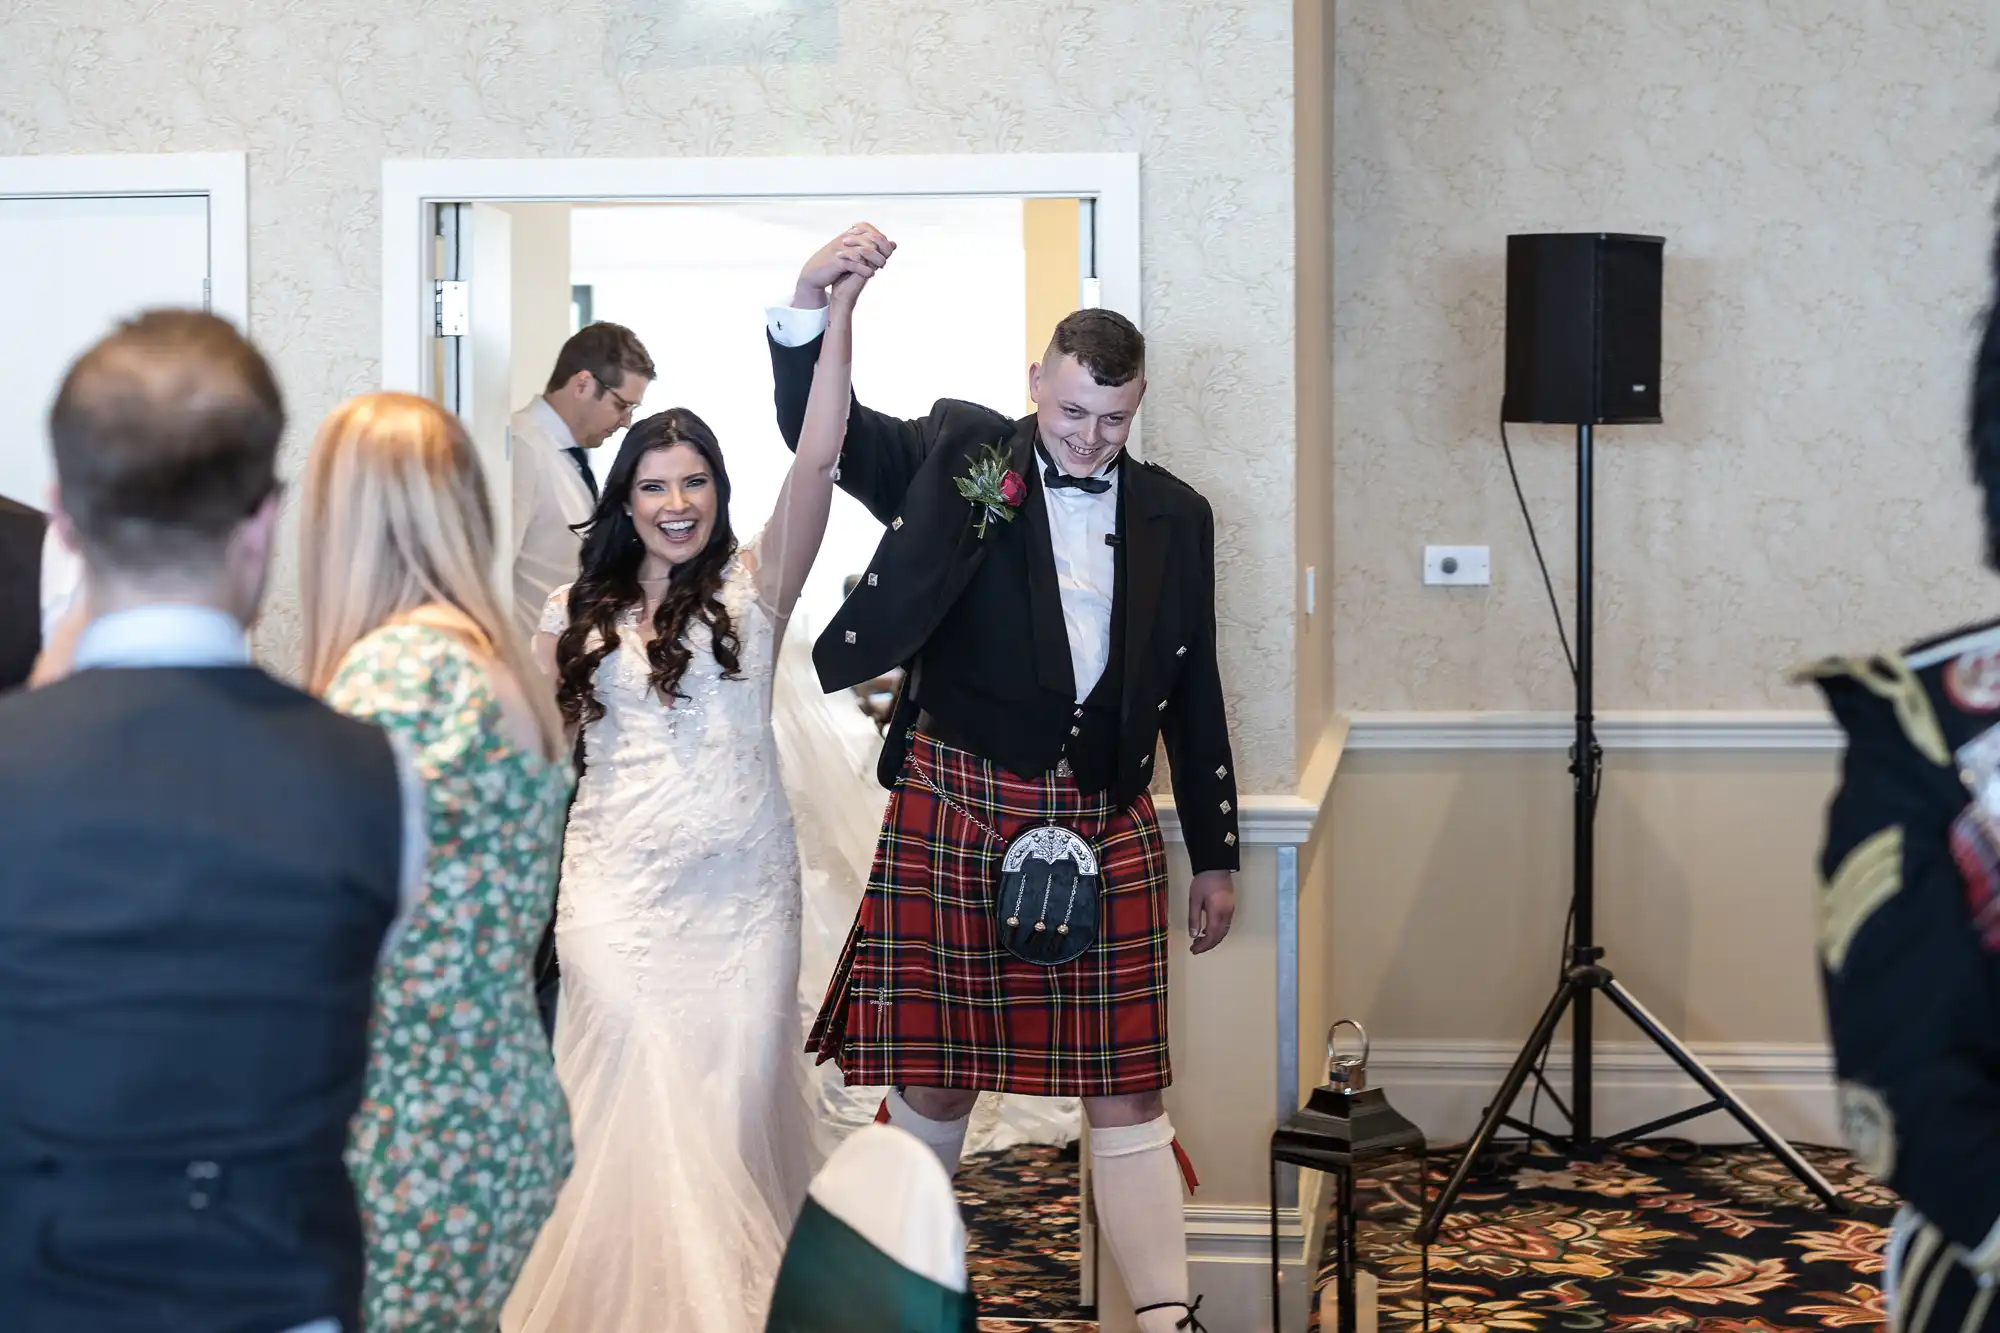 A bride and groom joyfully enter a reception hall, the groom wearing a traditional Scottish kilt, as guests applaud.